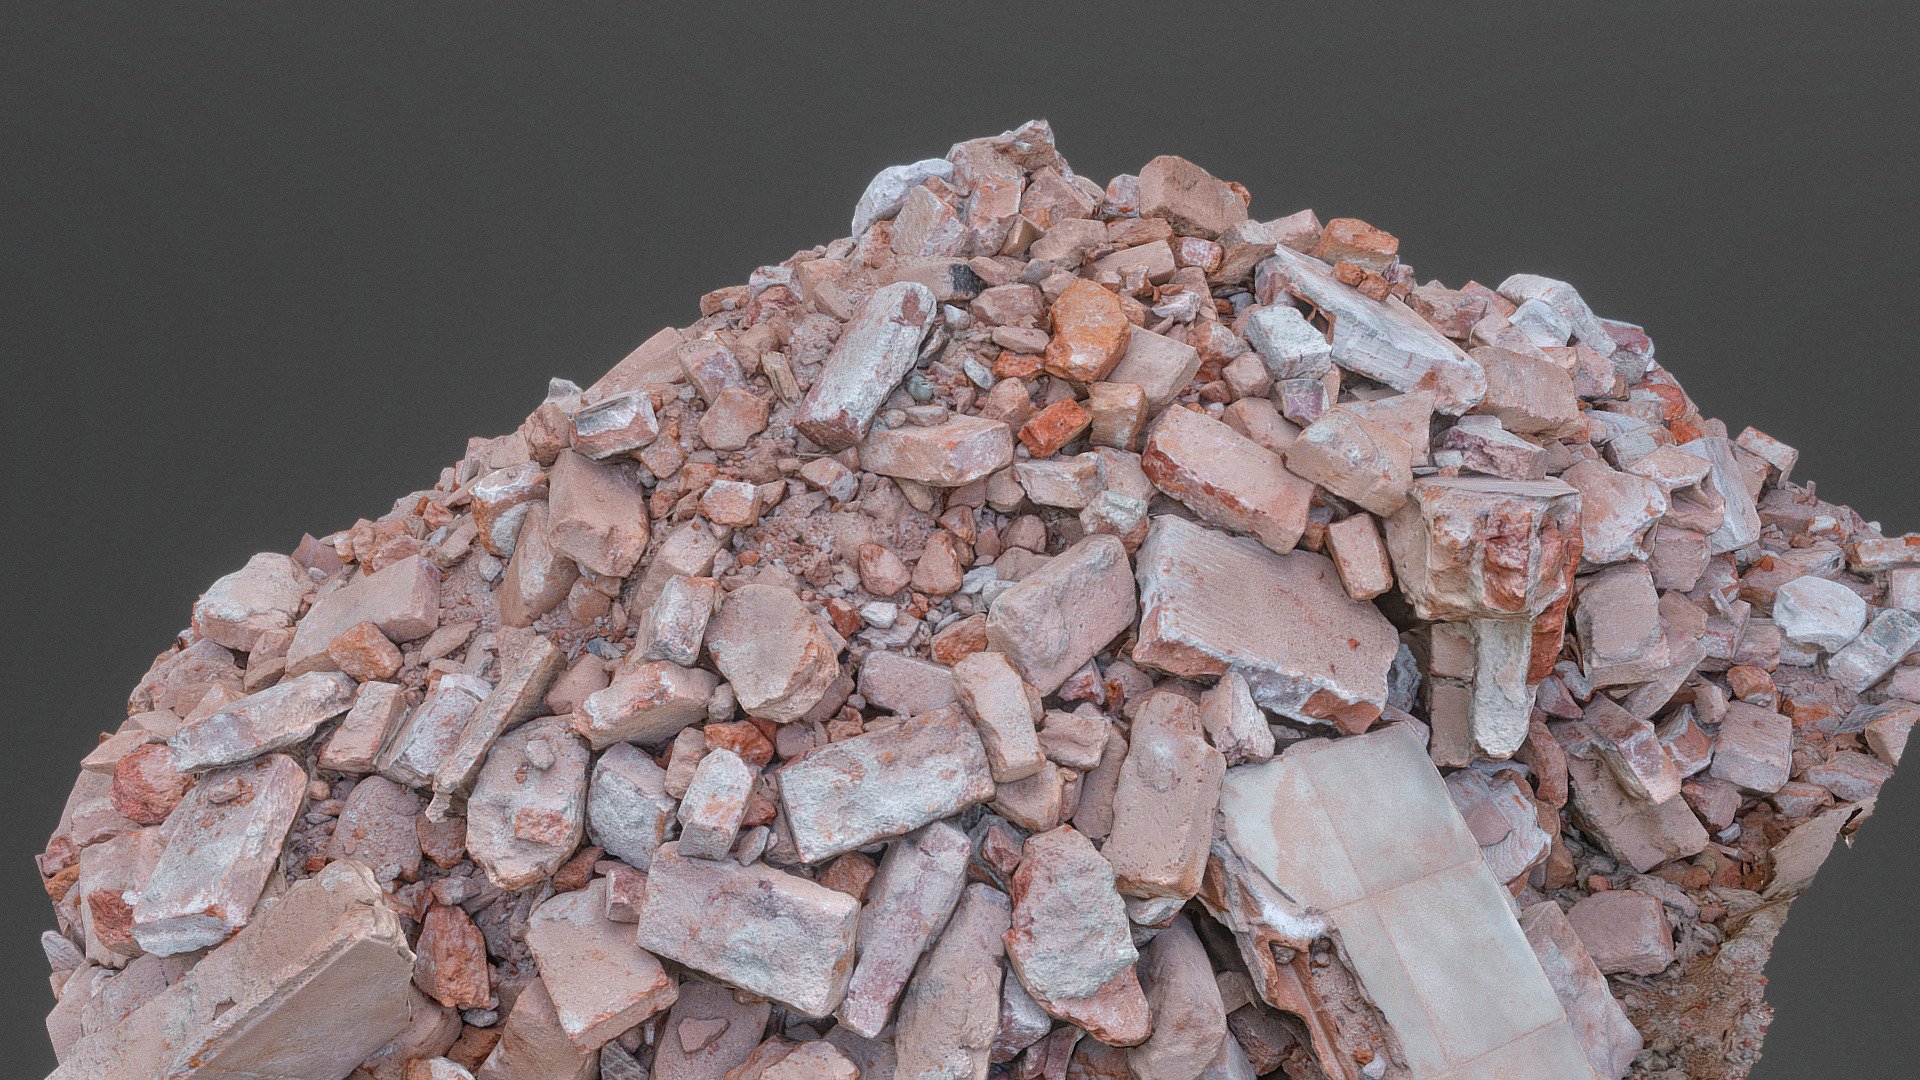 Heap of construction material building debris red bricks pile mound stack

photogrammetry scan (180x24mp), 3x16k textures + normals from 2m tris - Heap of construction debris bricks - Download Free 3D model by matousekfoto 3d model